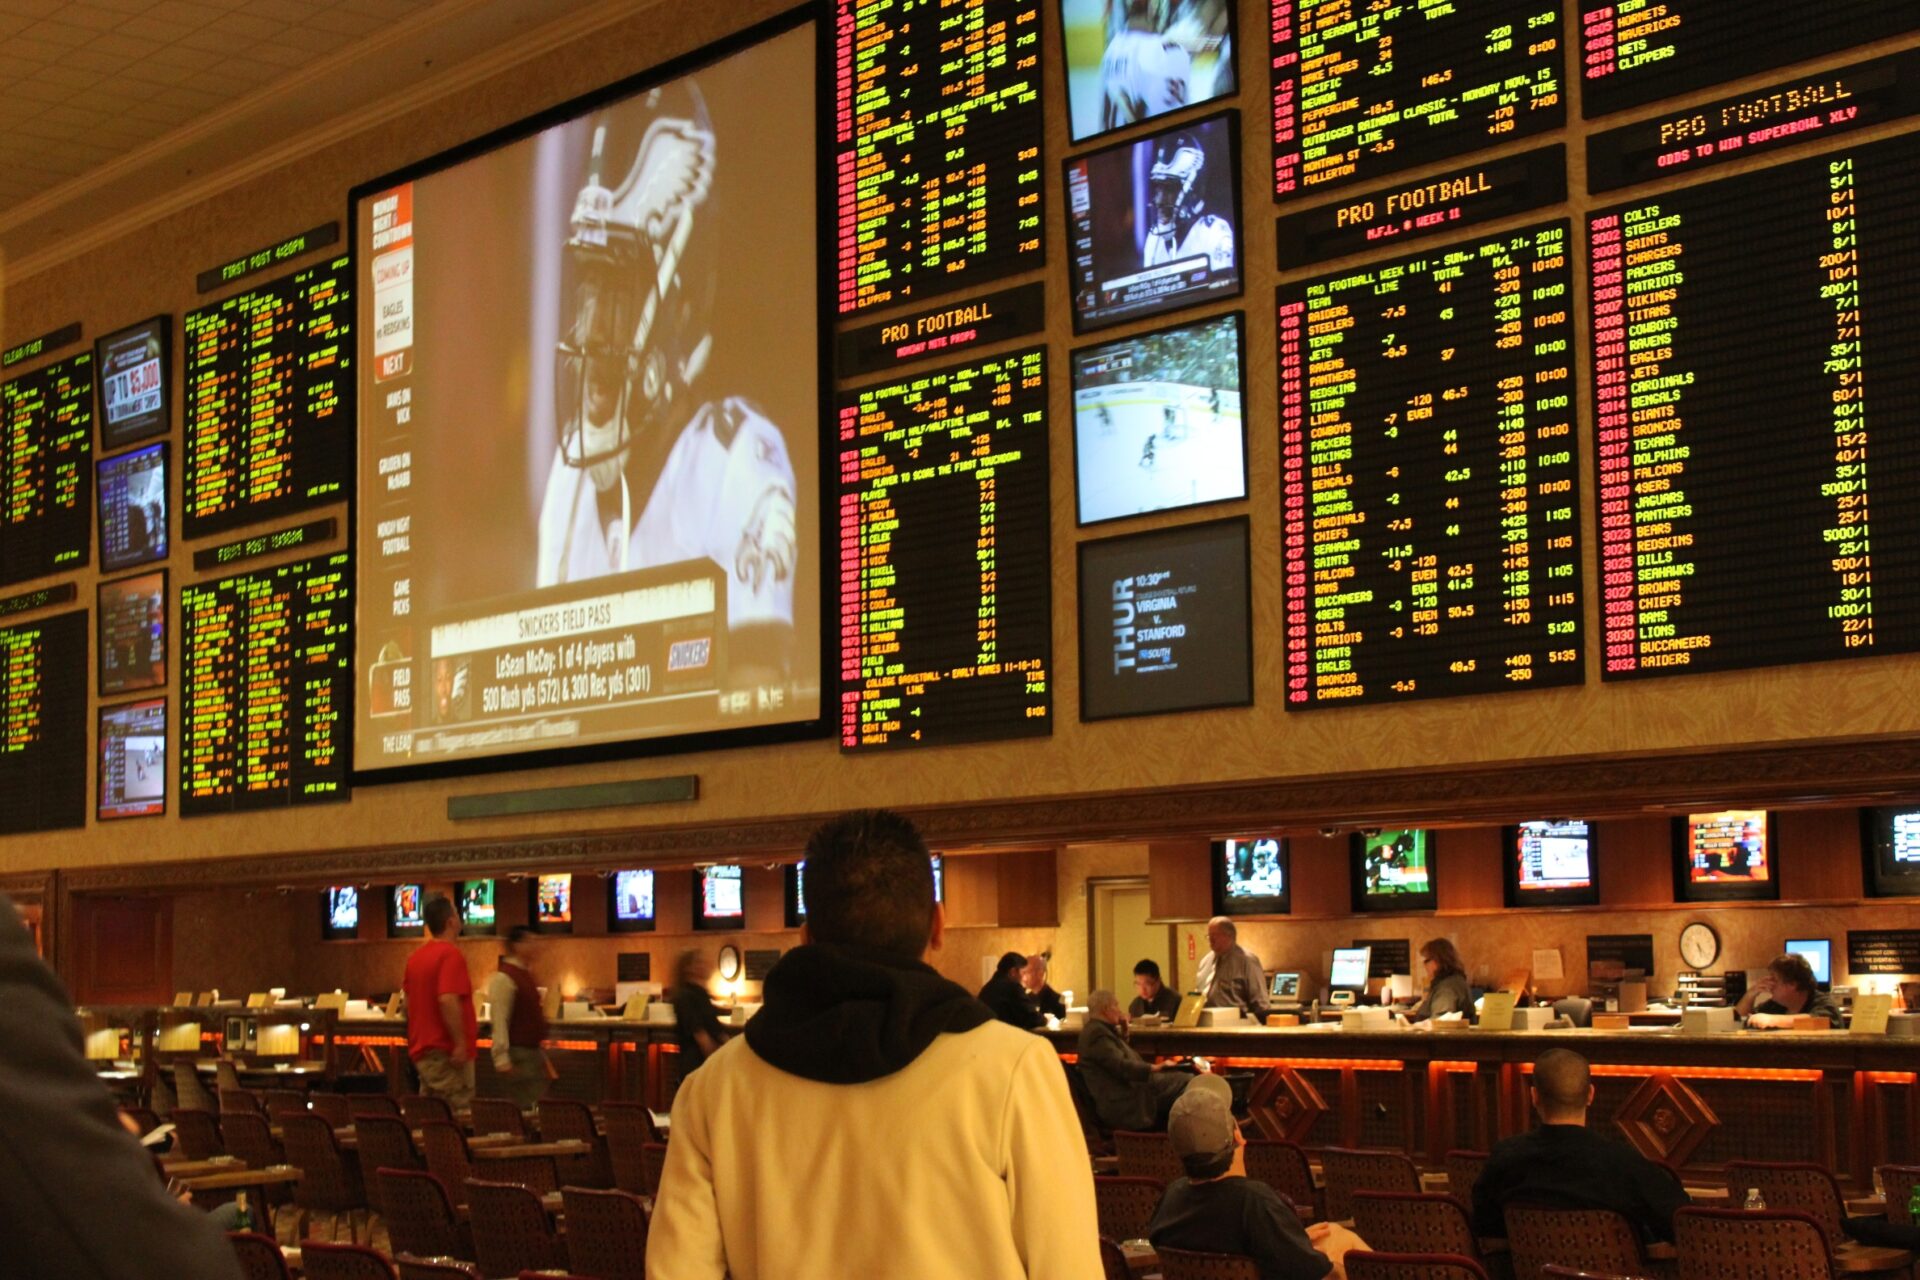 How can I be more successful at sports betting?